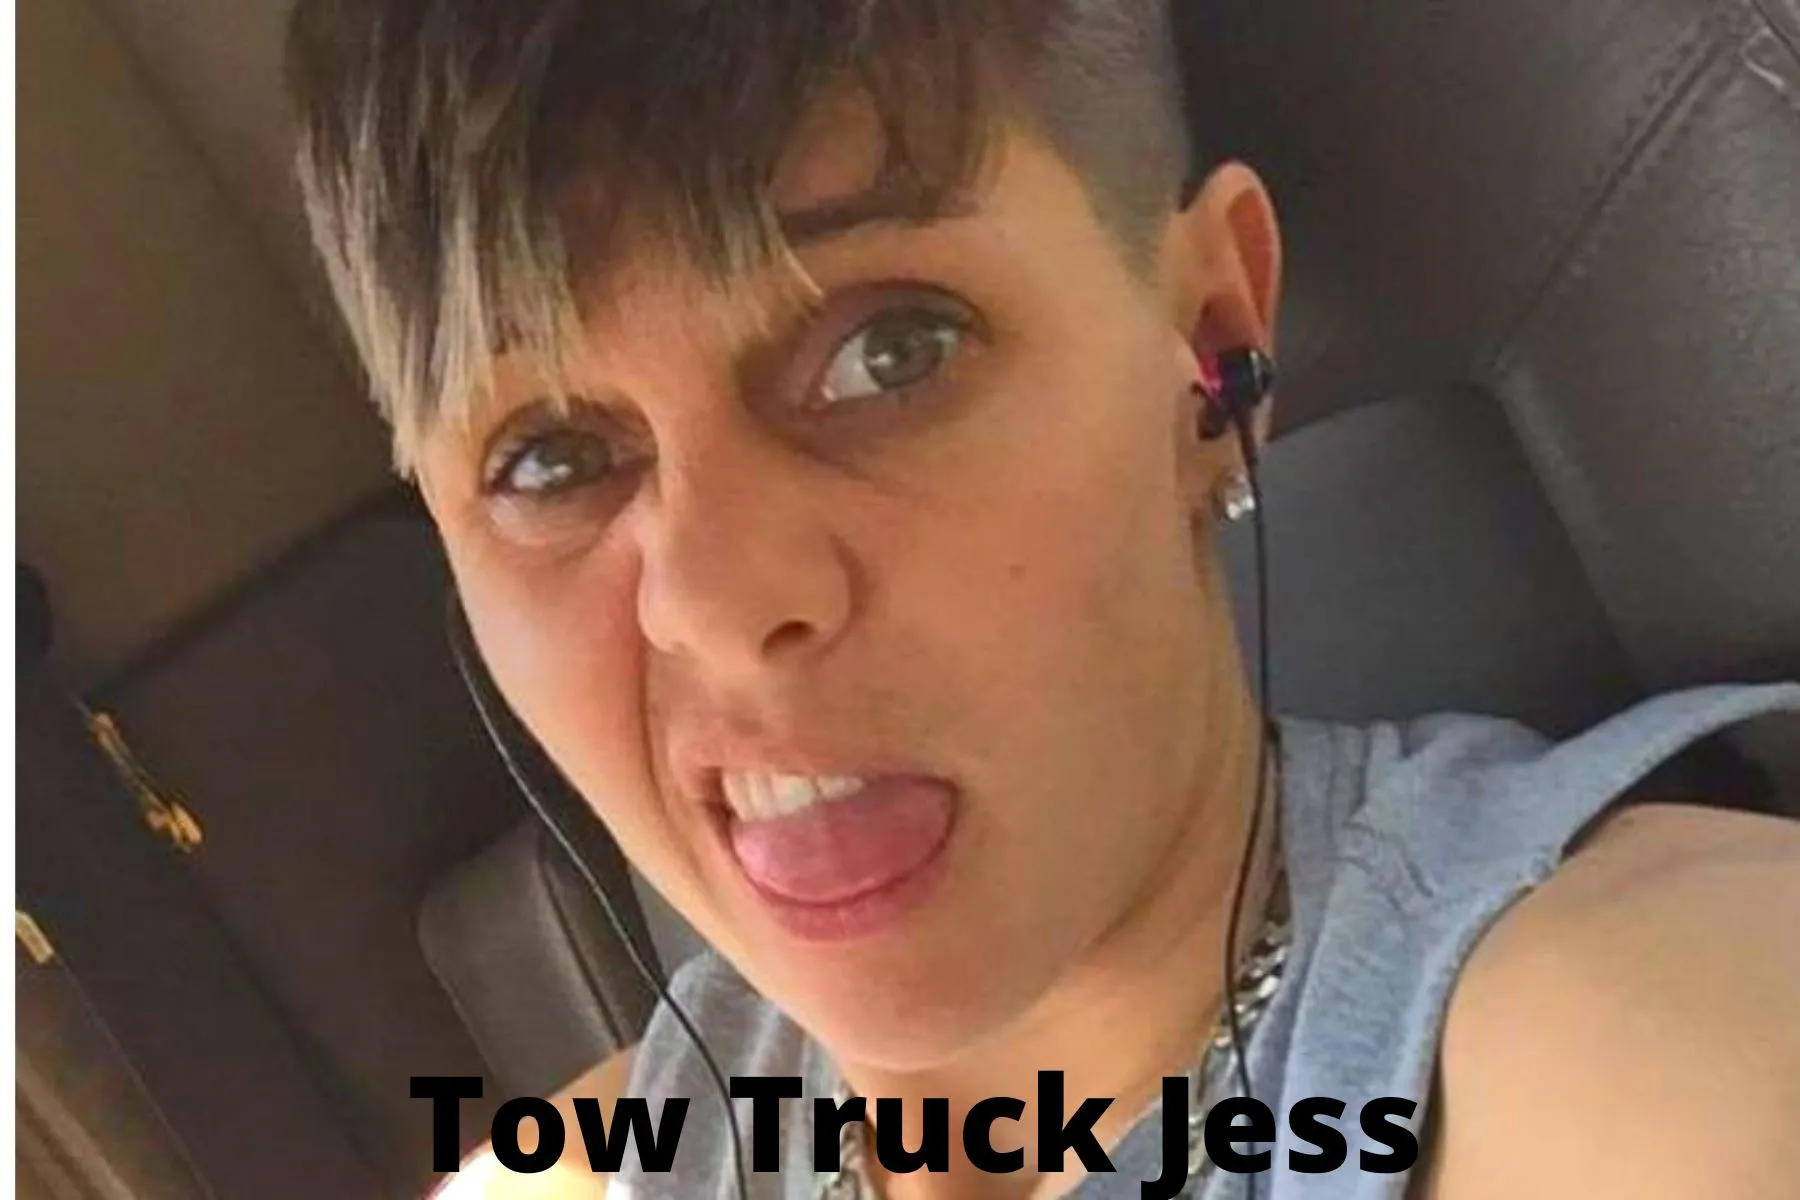 Tow Truck Jess Biography, Career, Court Case and More United Fact